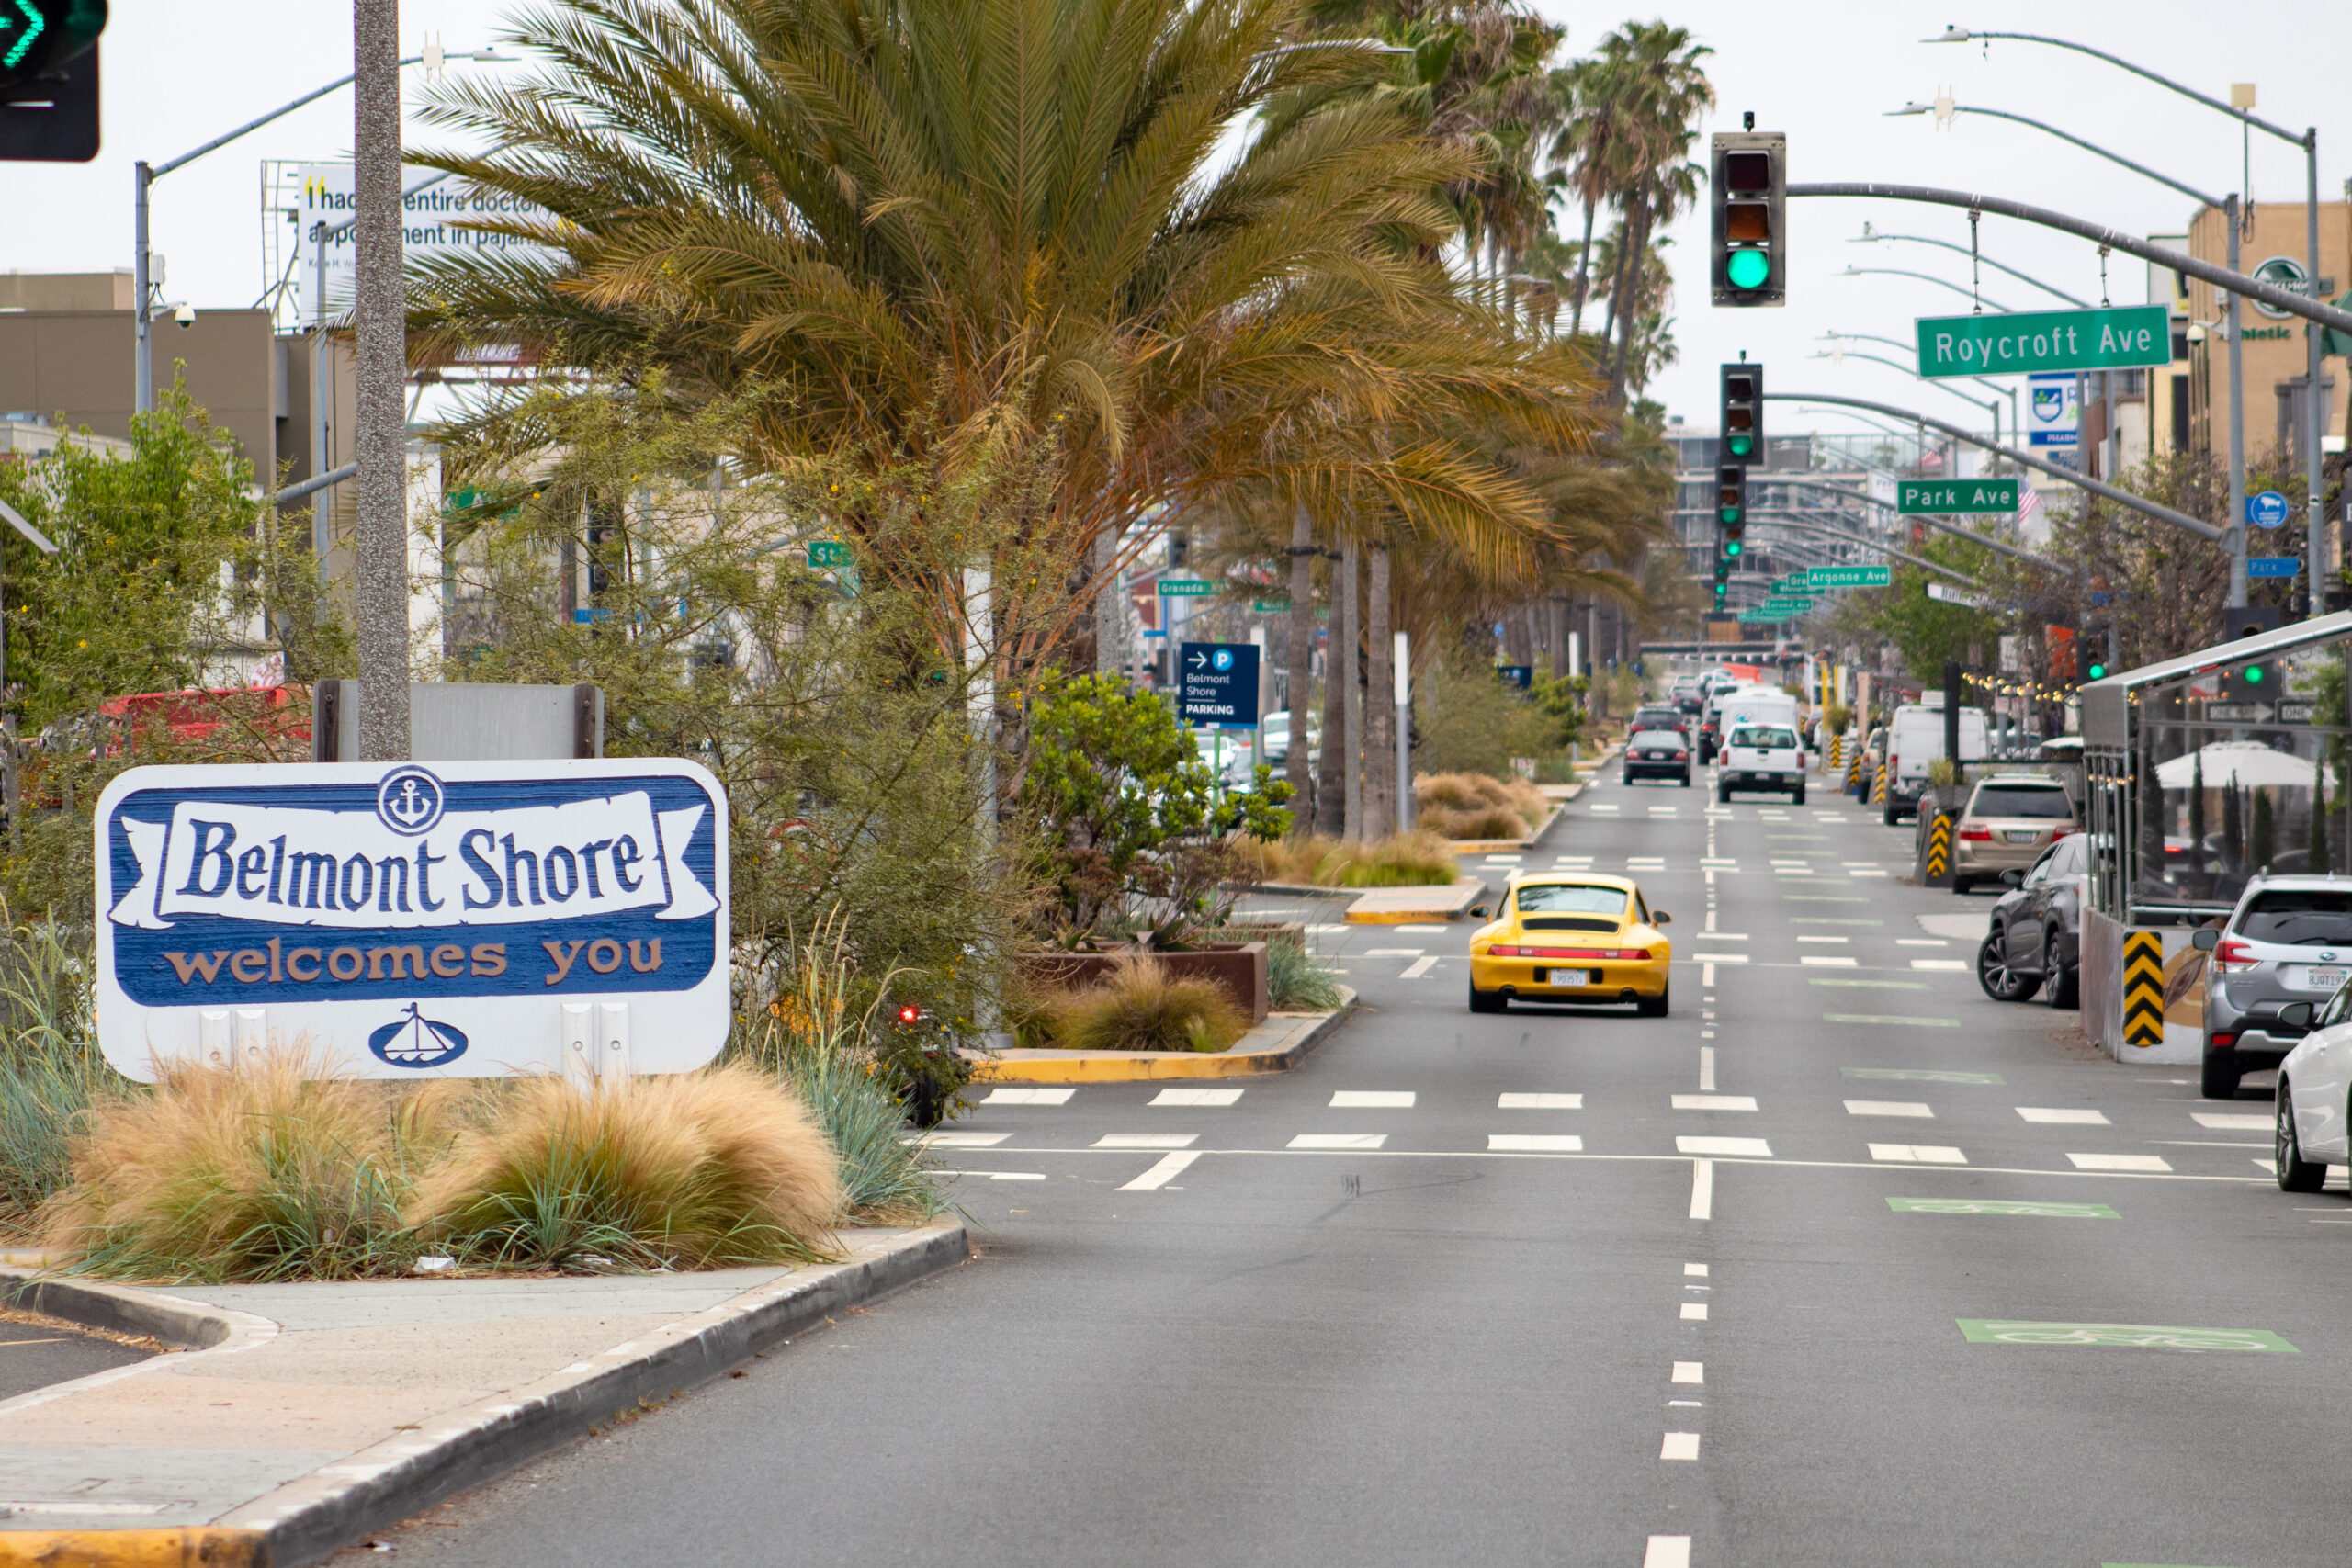 Belmont Shore –  A sea city in the making